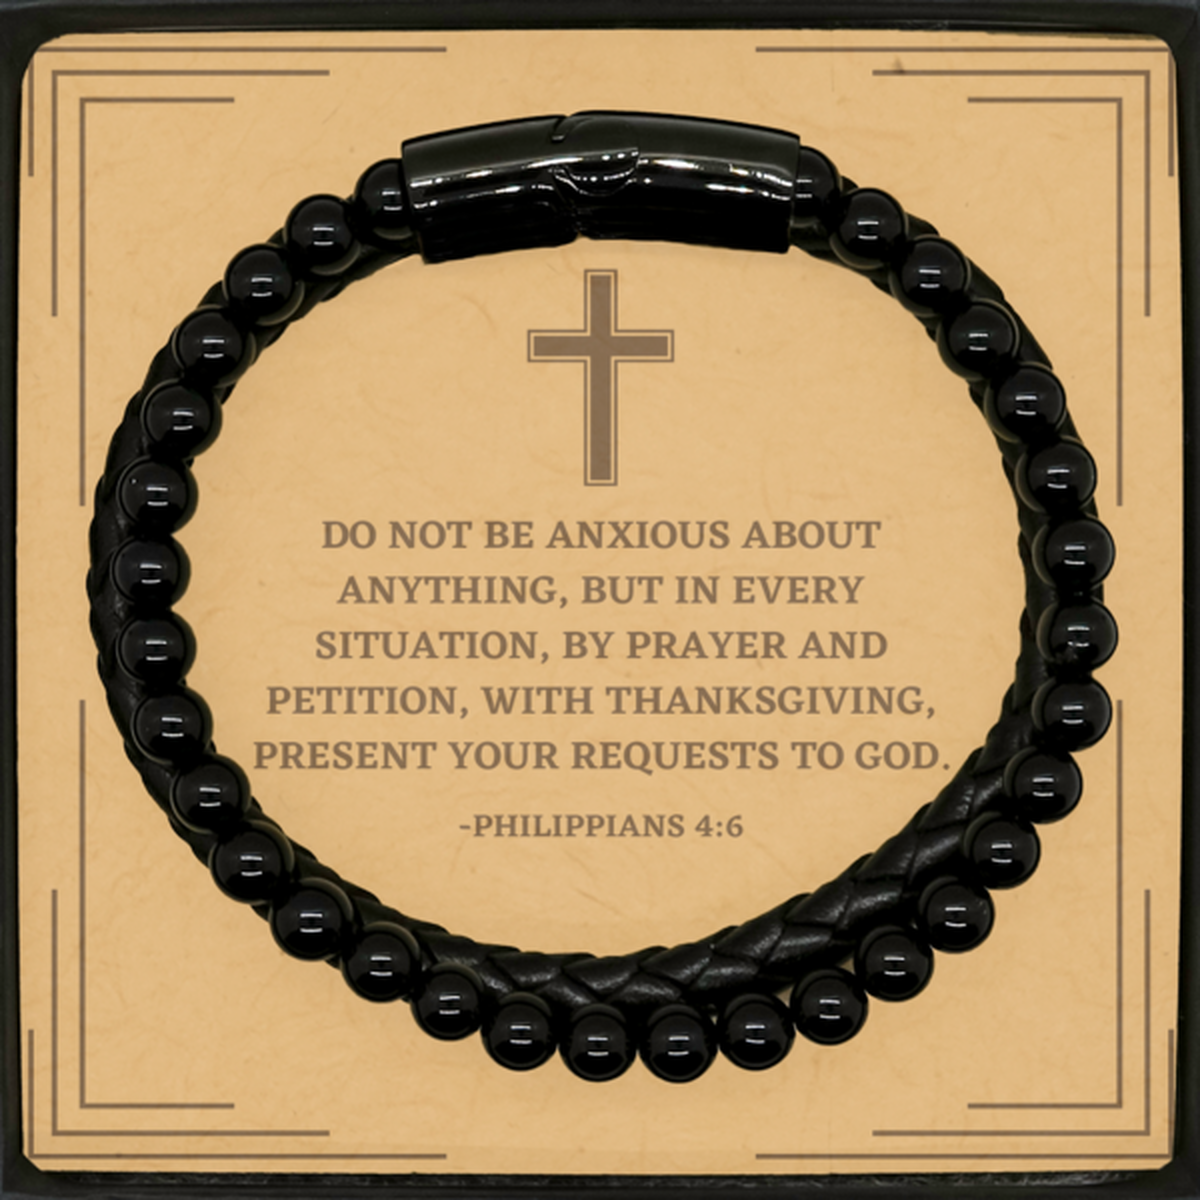 Baptism Gifts For Teenage Boys Girls, Christian Bible Verse Stone Leather Bracelet, Do not be anxious about anything, Confirmation Gifts, Bible Verse Card for Son, Godson, Grandson